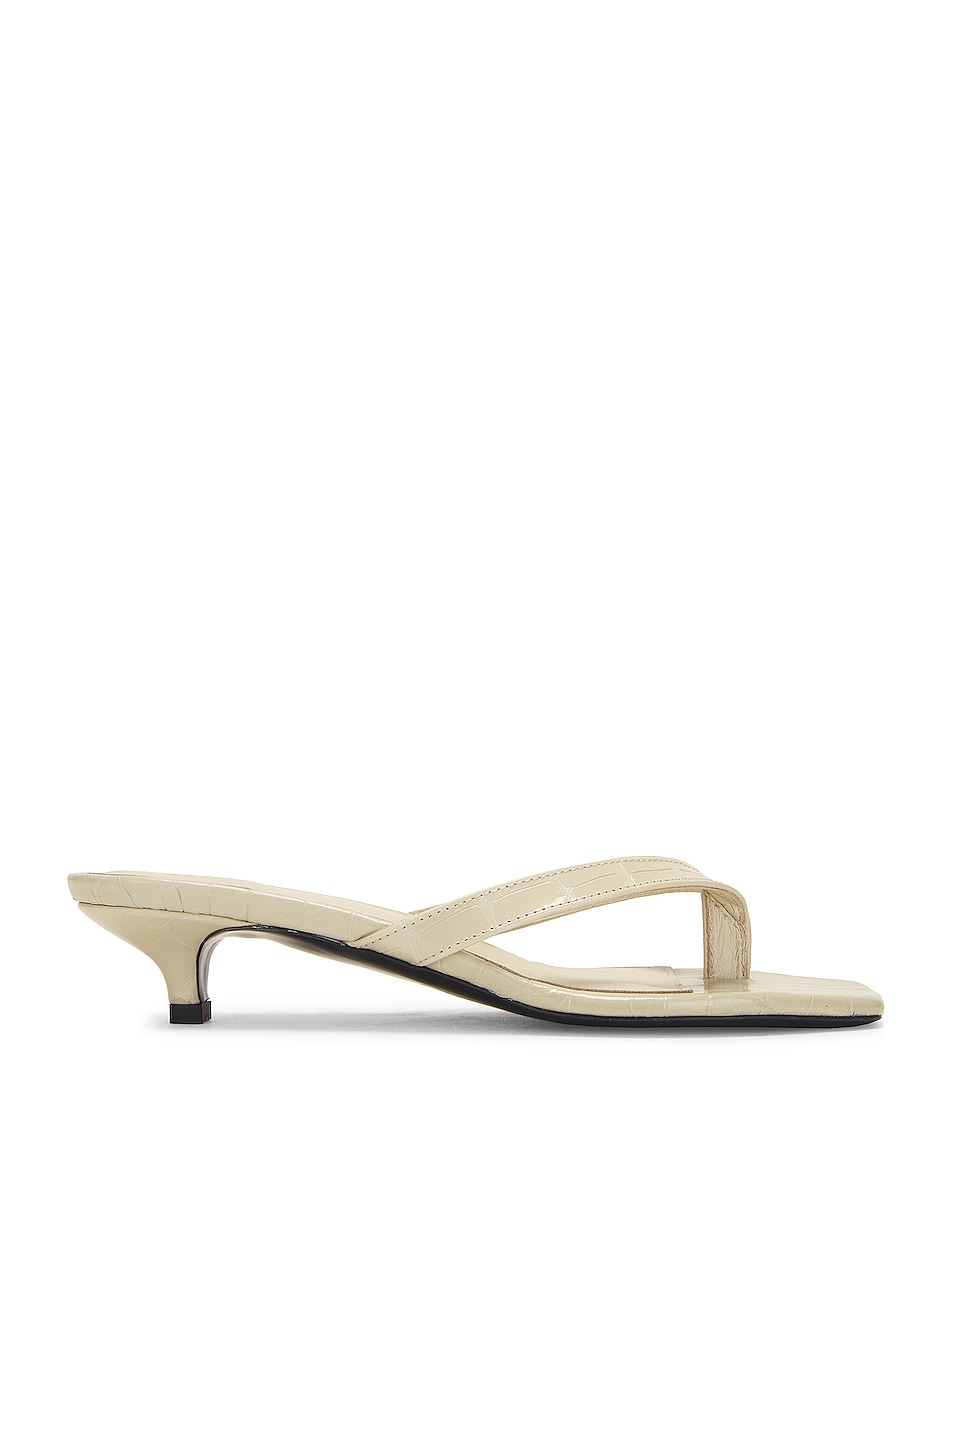 Image 1 of Toteme The Flip-Flop Heel in Sand Croco